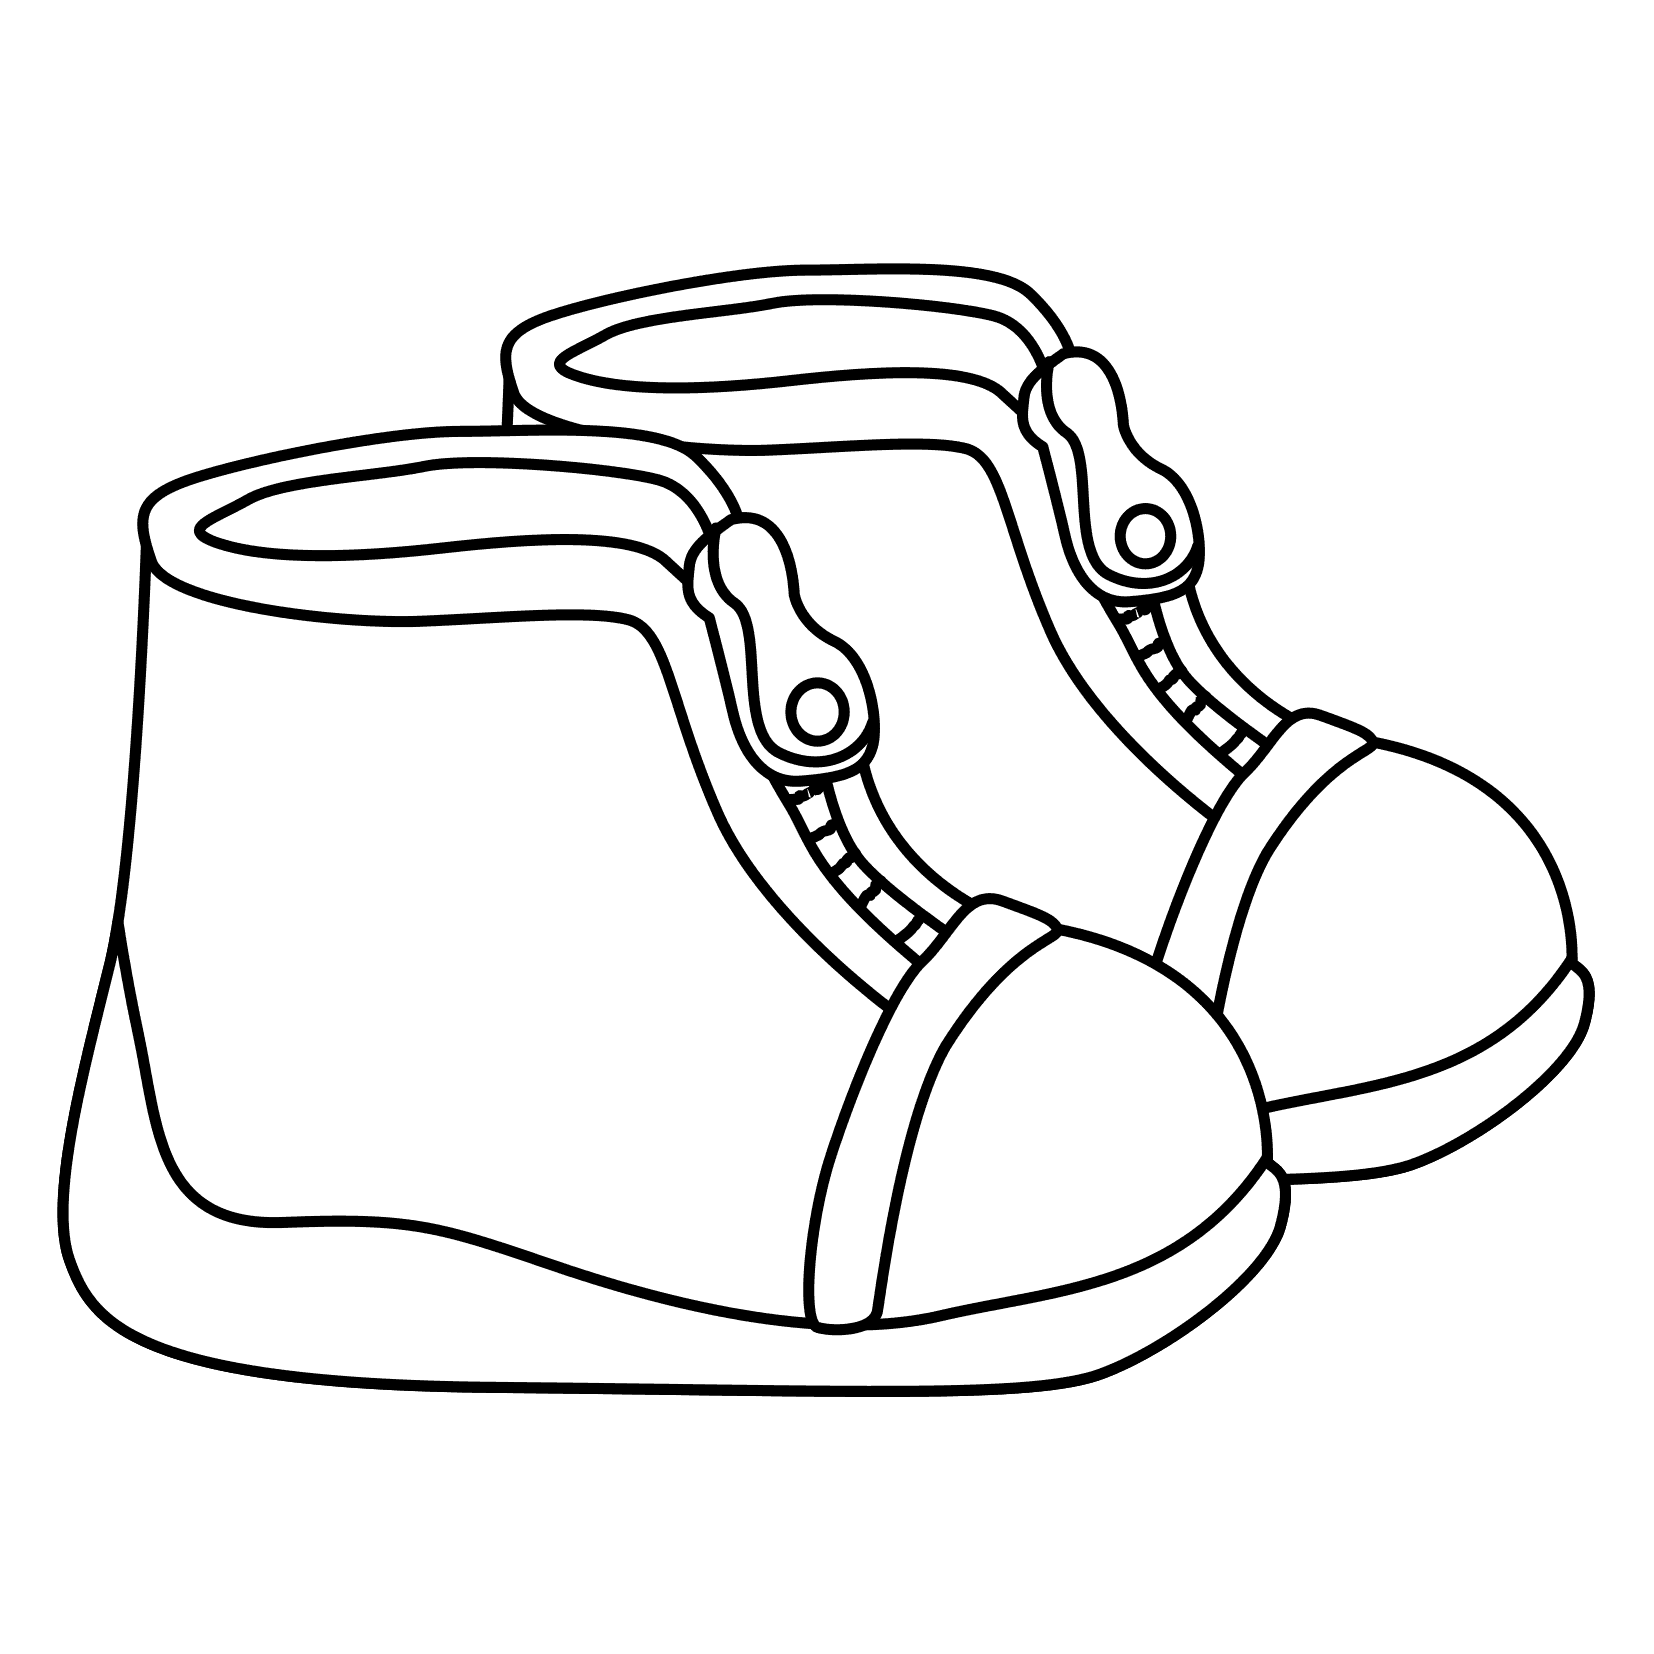 Printable Coloring Pages Shoes - High Quality Coloring Pages - Coloring